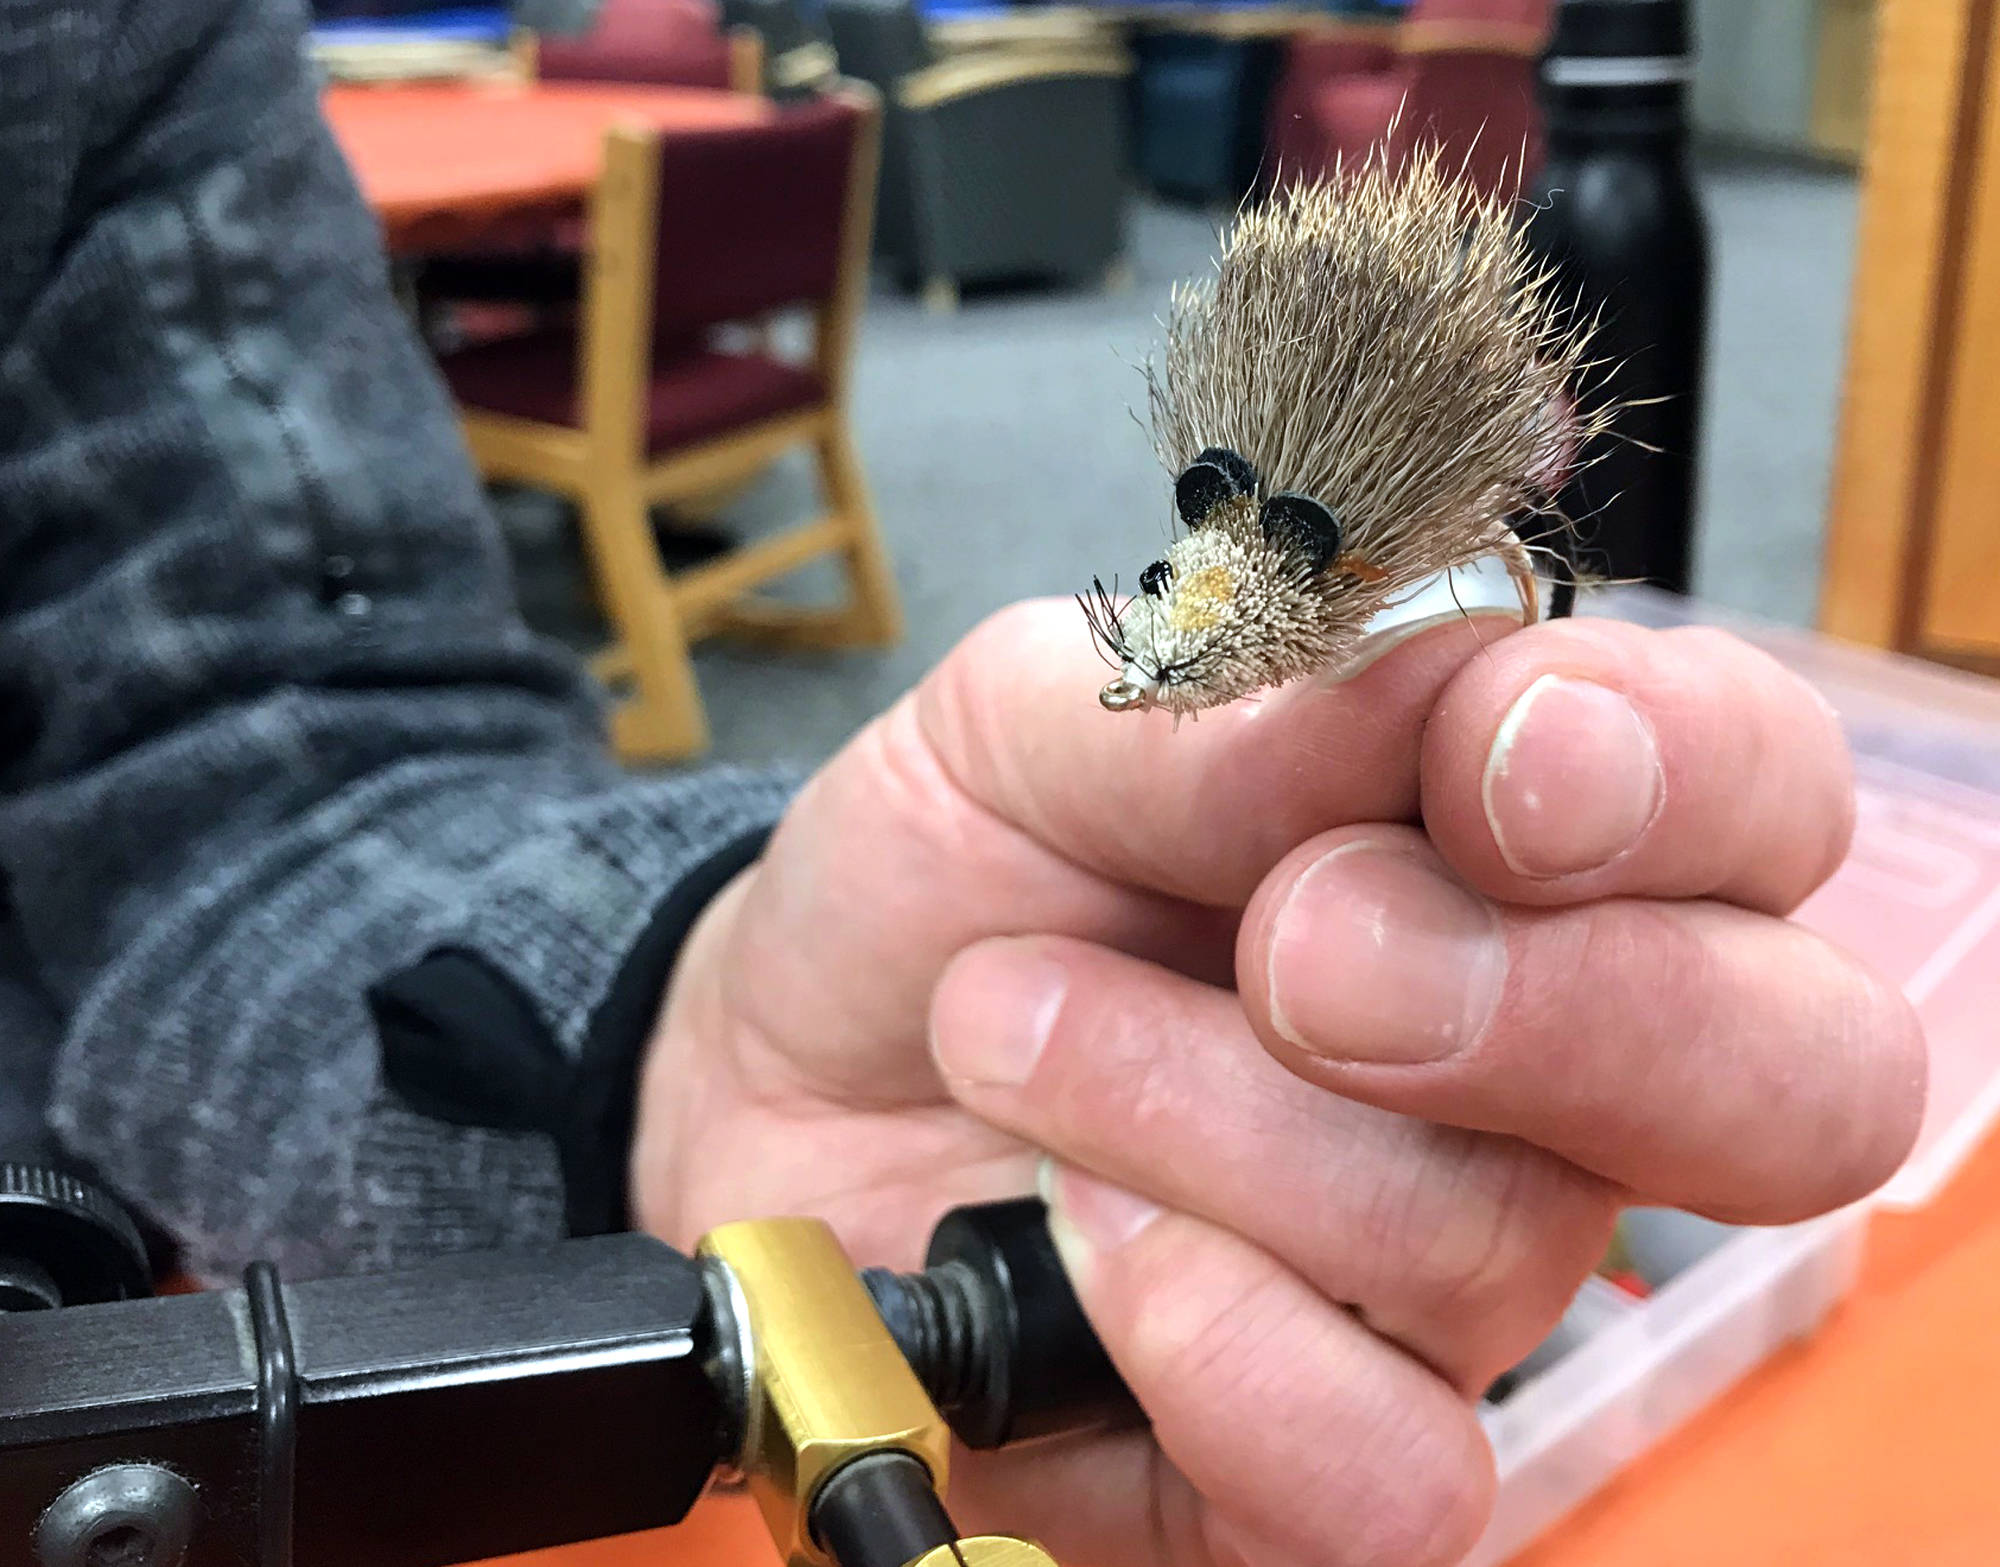 LEFT: Dave Atcheson displays a fly that resembles a small mouse, which would be useful in western Alaska where the small animals are a major food source for local fish. (Photo by Kat Sorensen/Peninsula Clarion)